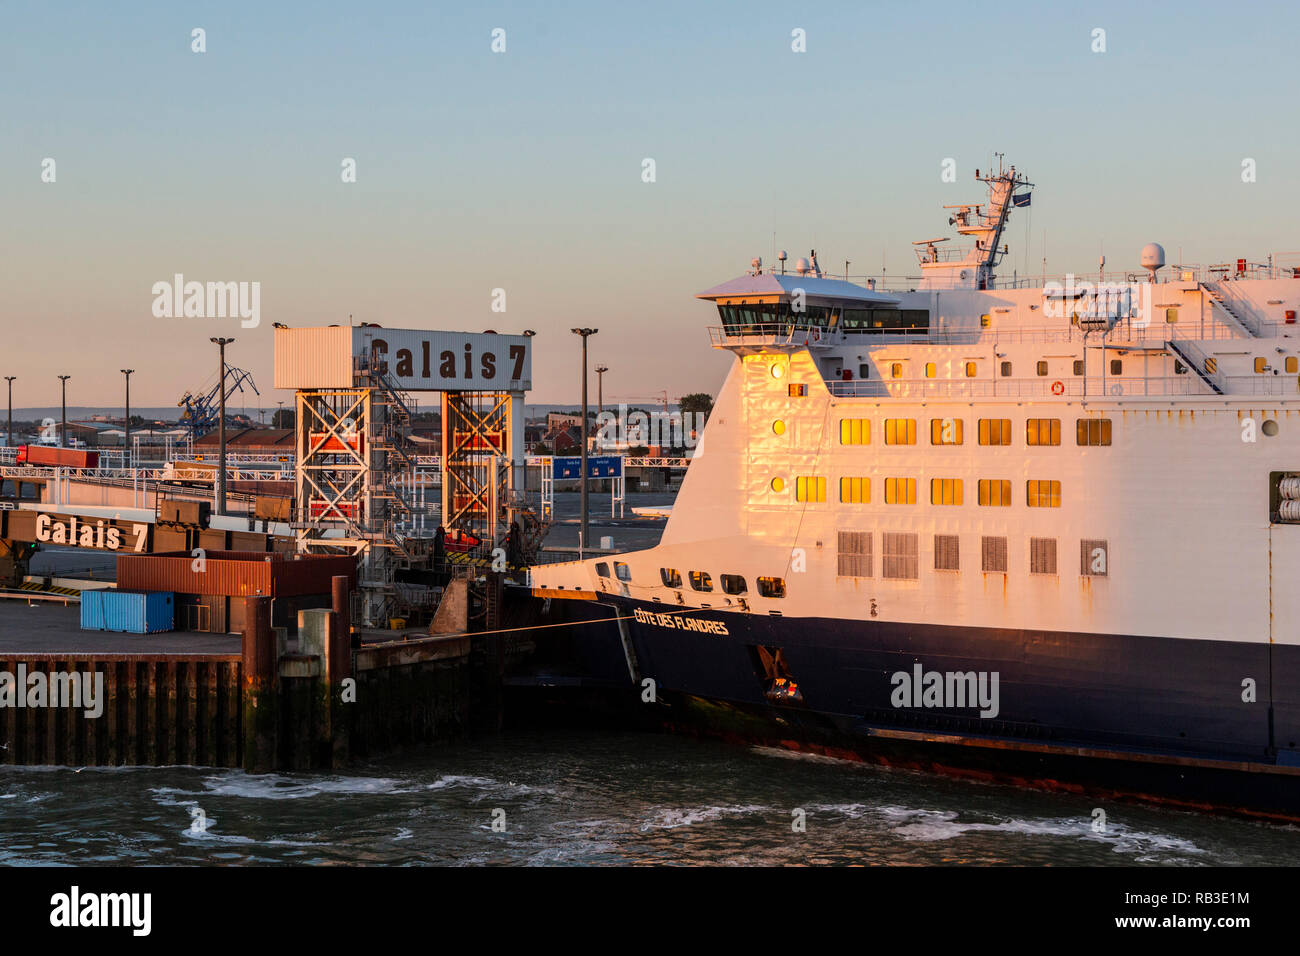 DFDS ferry in the Port of Calais, France, Europe Stock Photo - Alamy